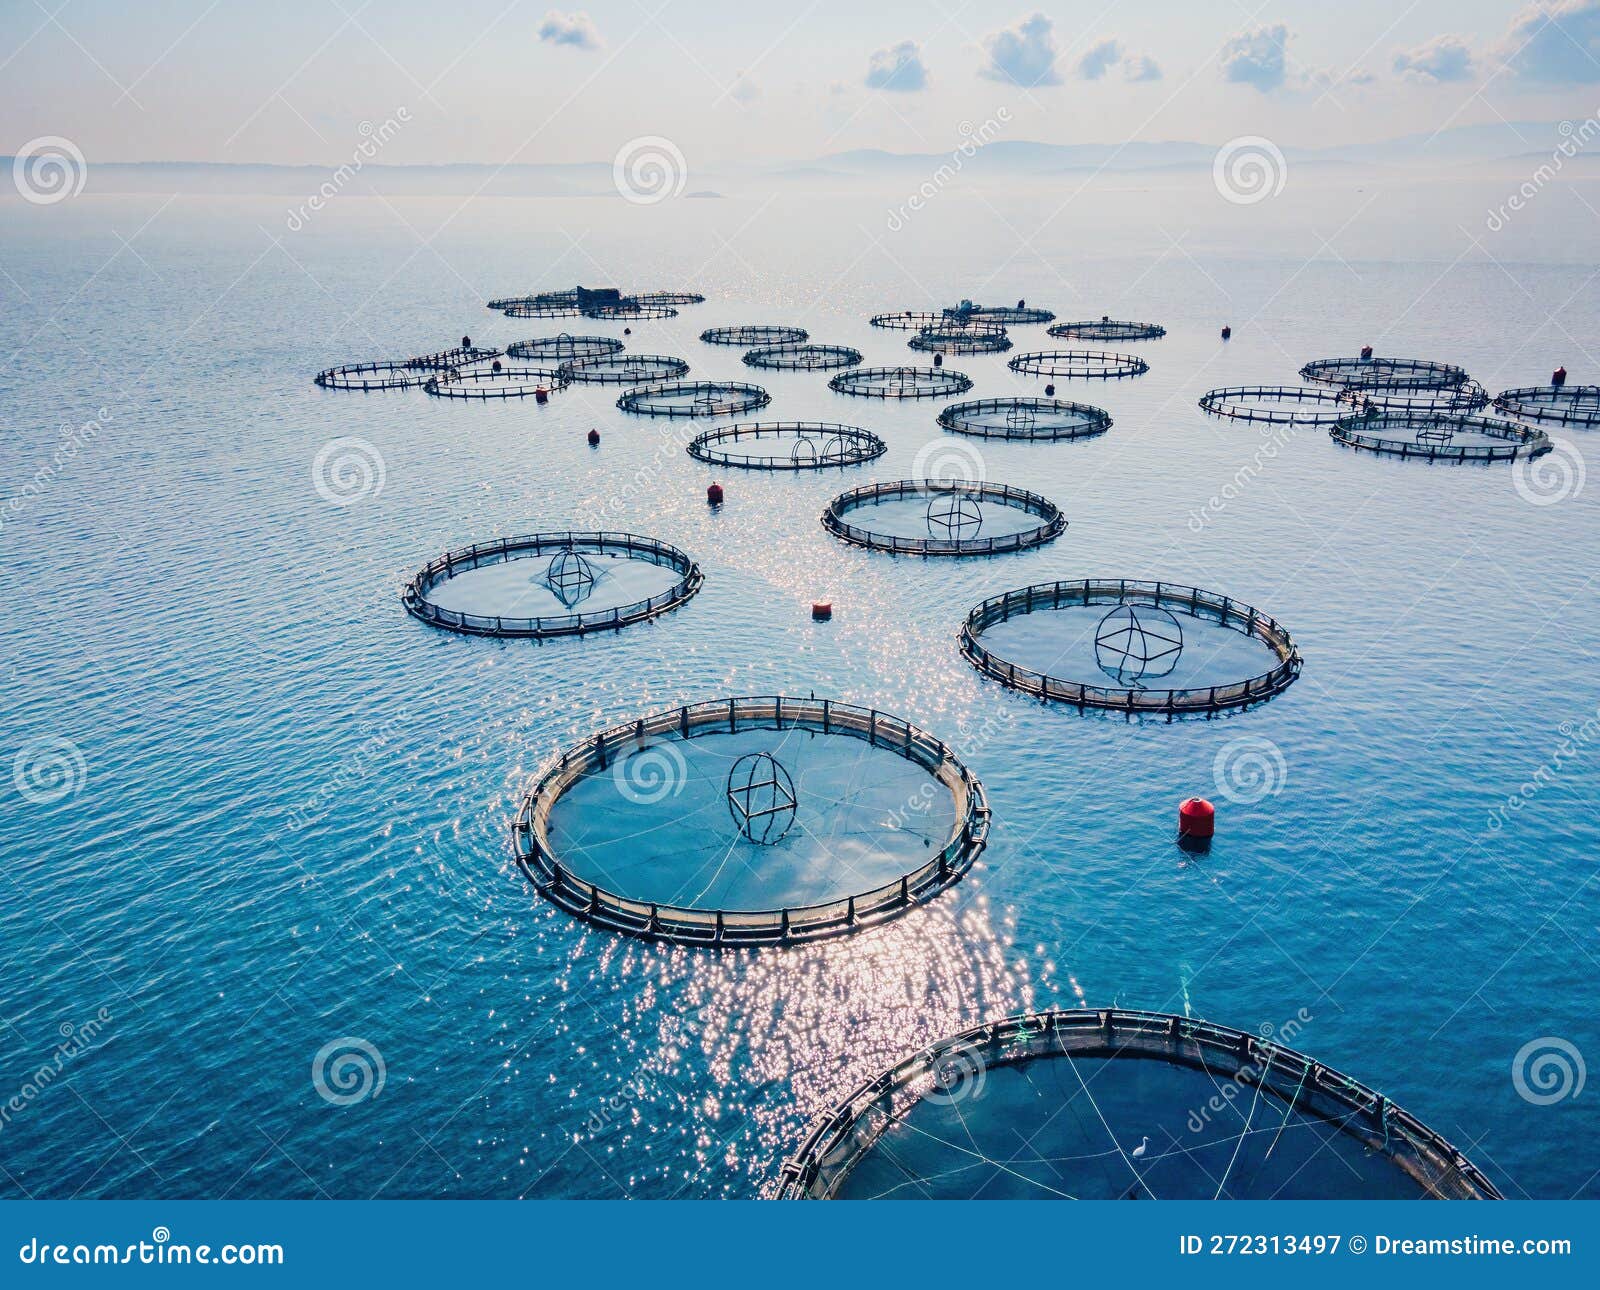 https://thumbs.dreamstime.com/z/fish-farm-floating-net-sea-water-surface-coast-skyline-seafood-business-aquaculture-aerial-view-272313497.jpg